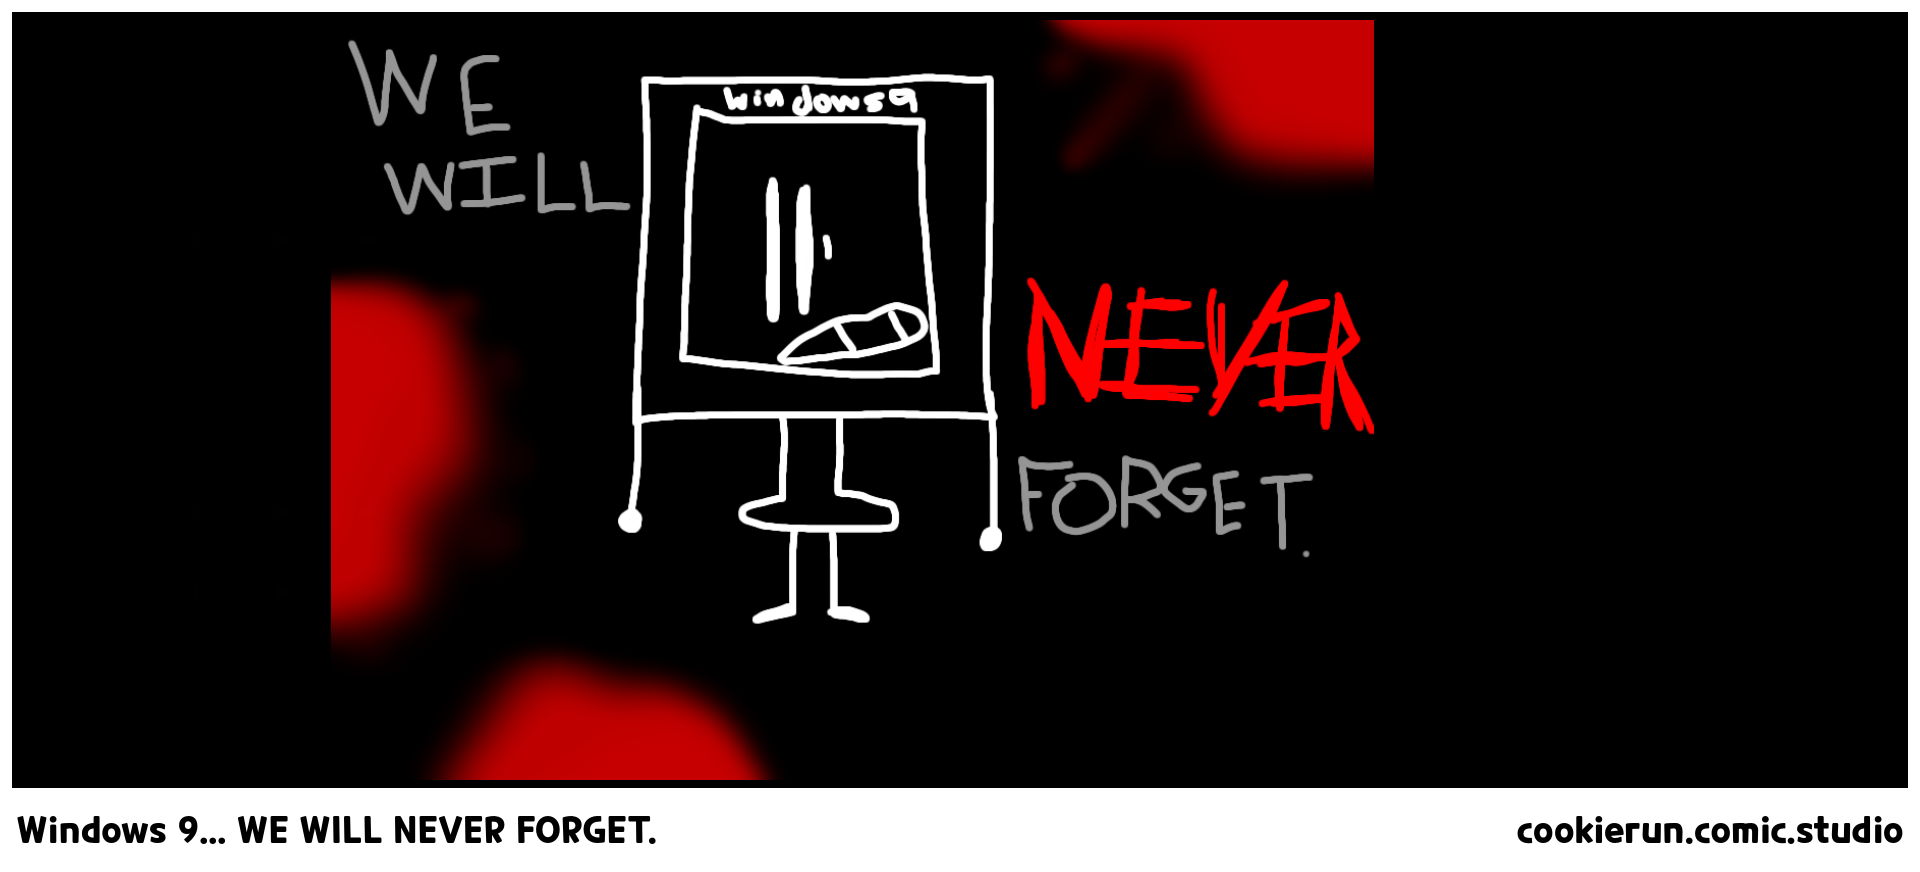 Windows 9... WE WILL NEVER FORGET.